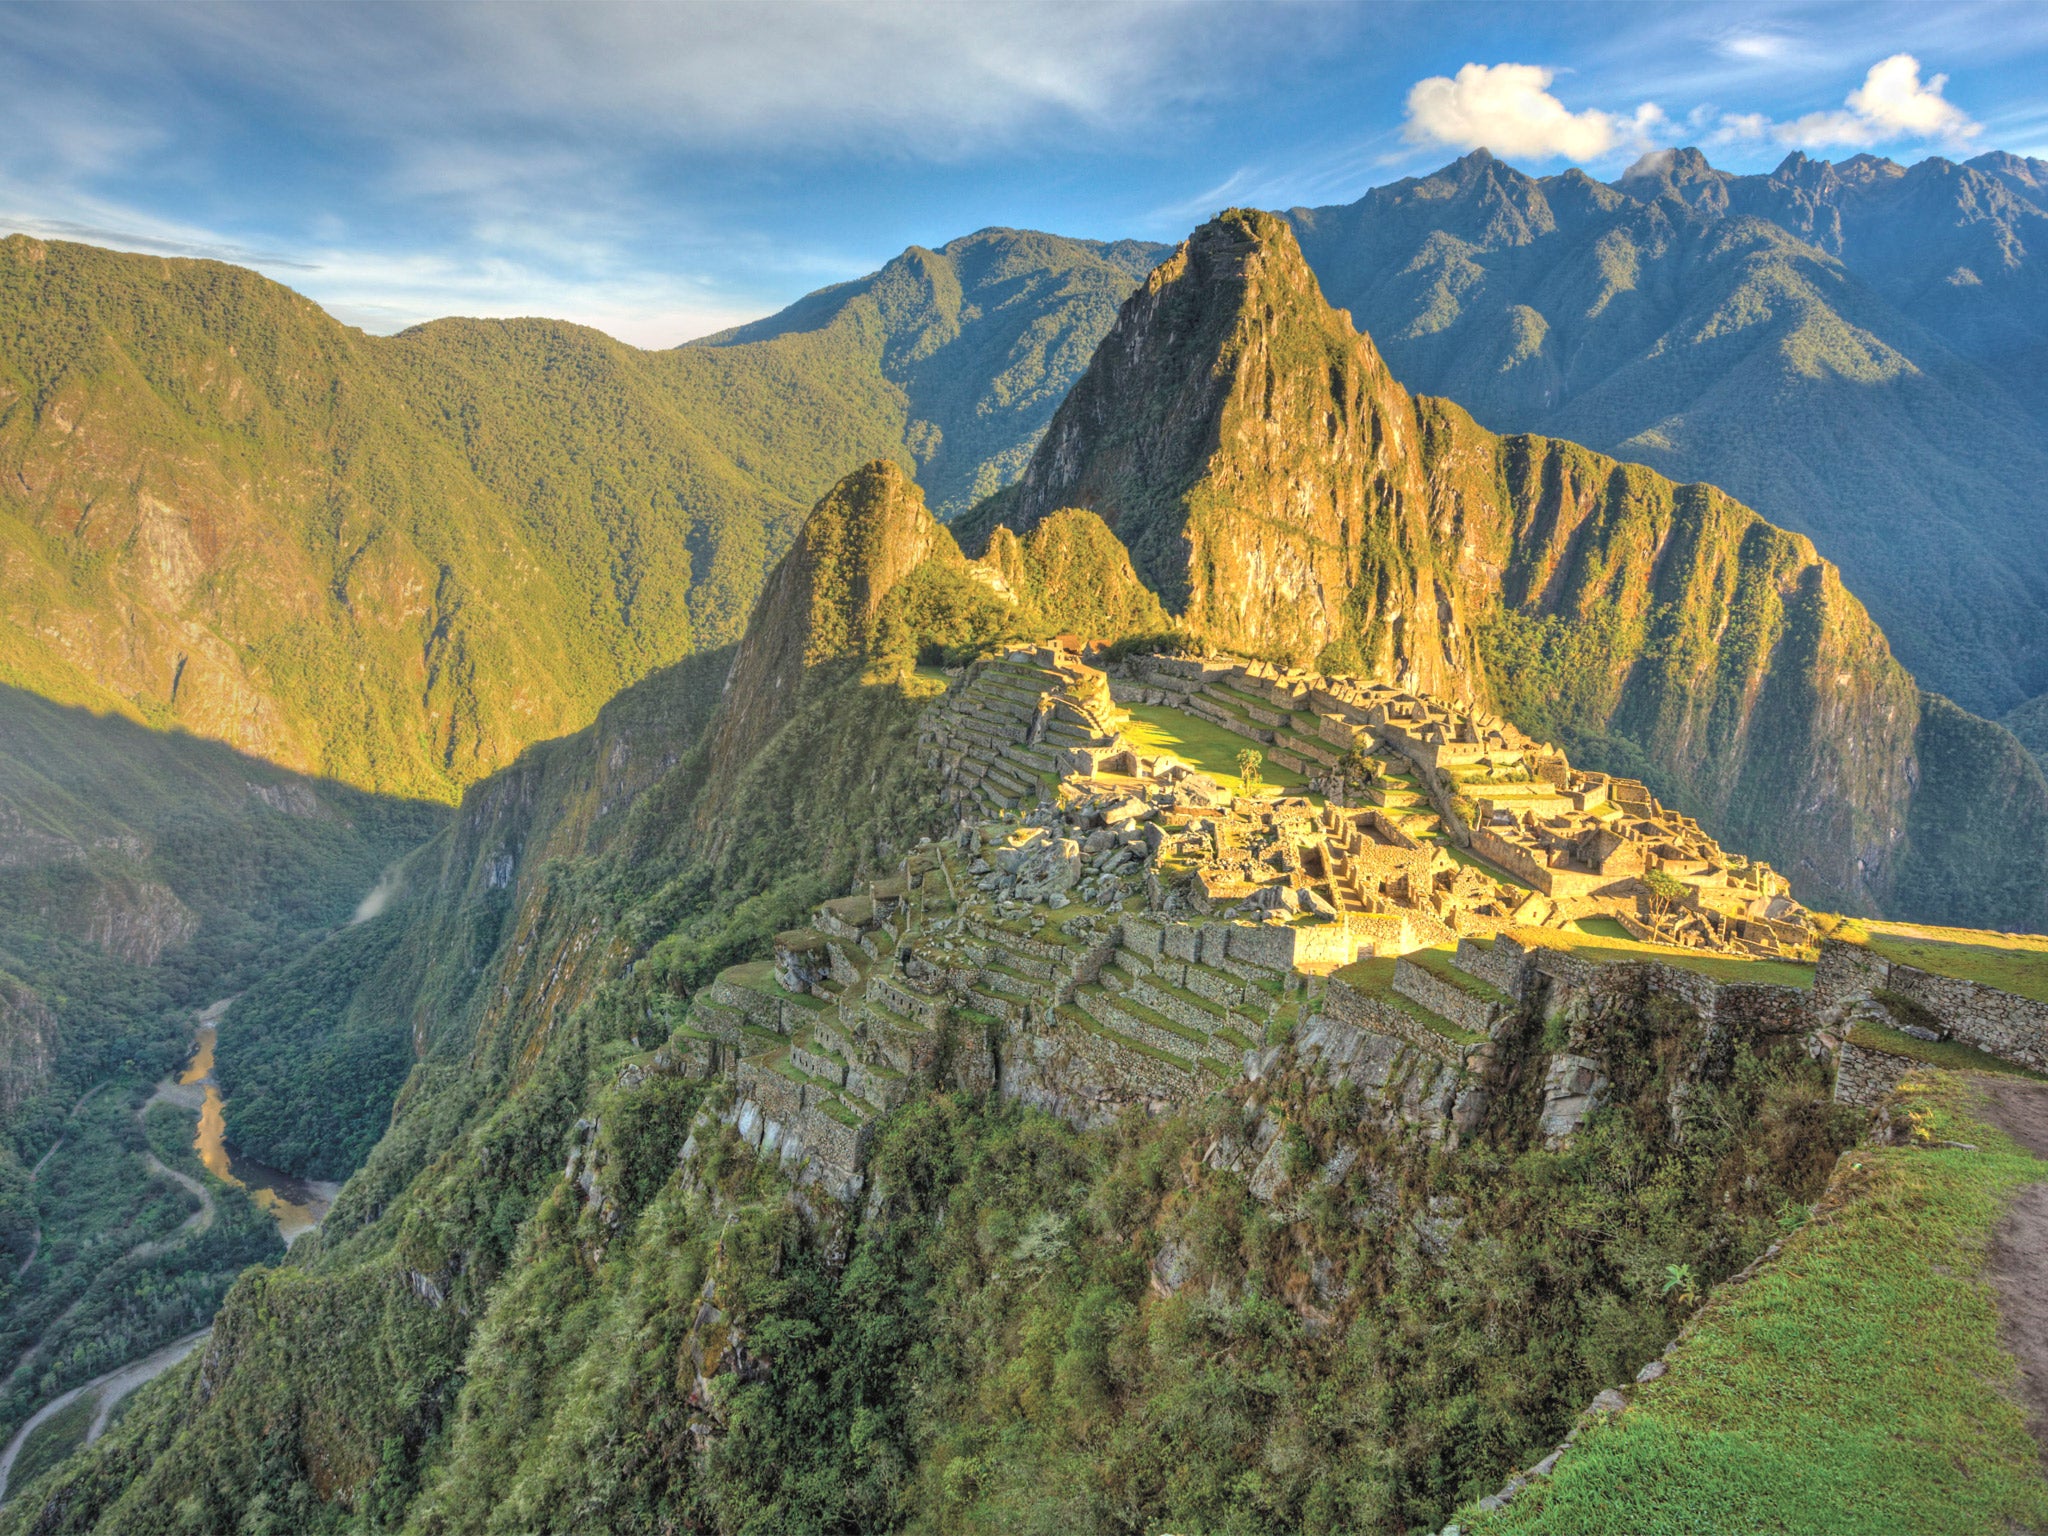 Trekking permits for Machu Picchu are limited